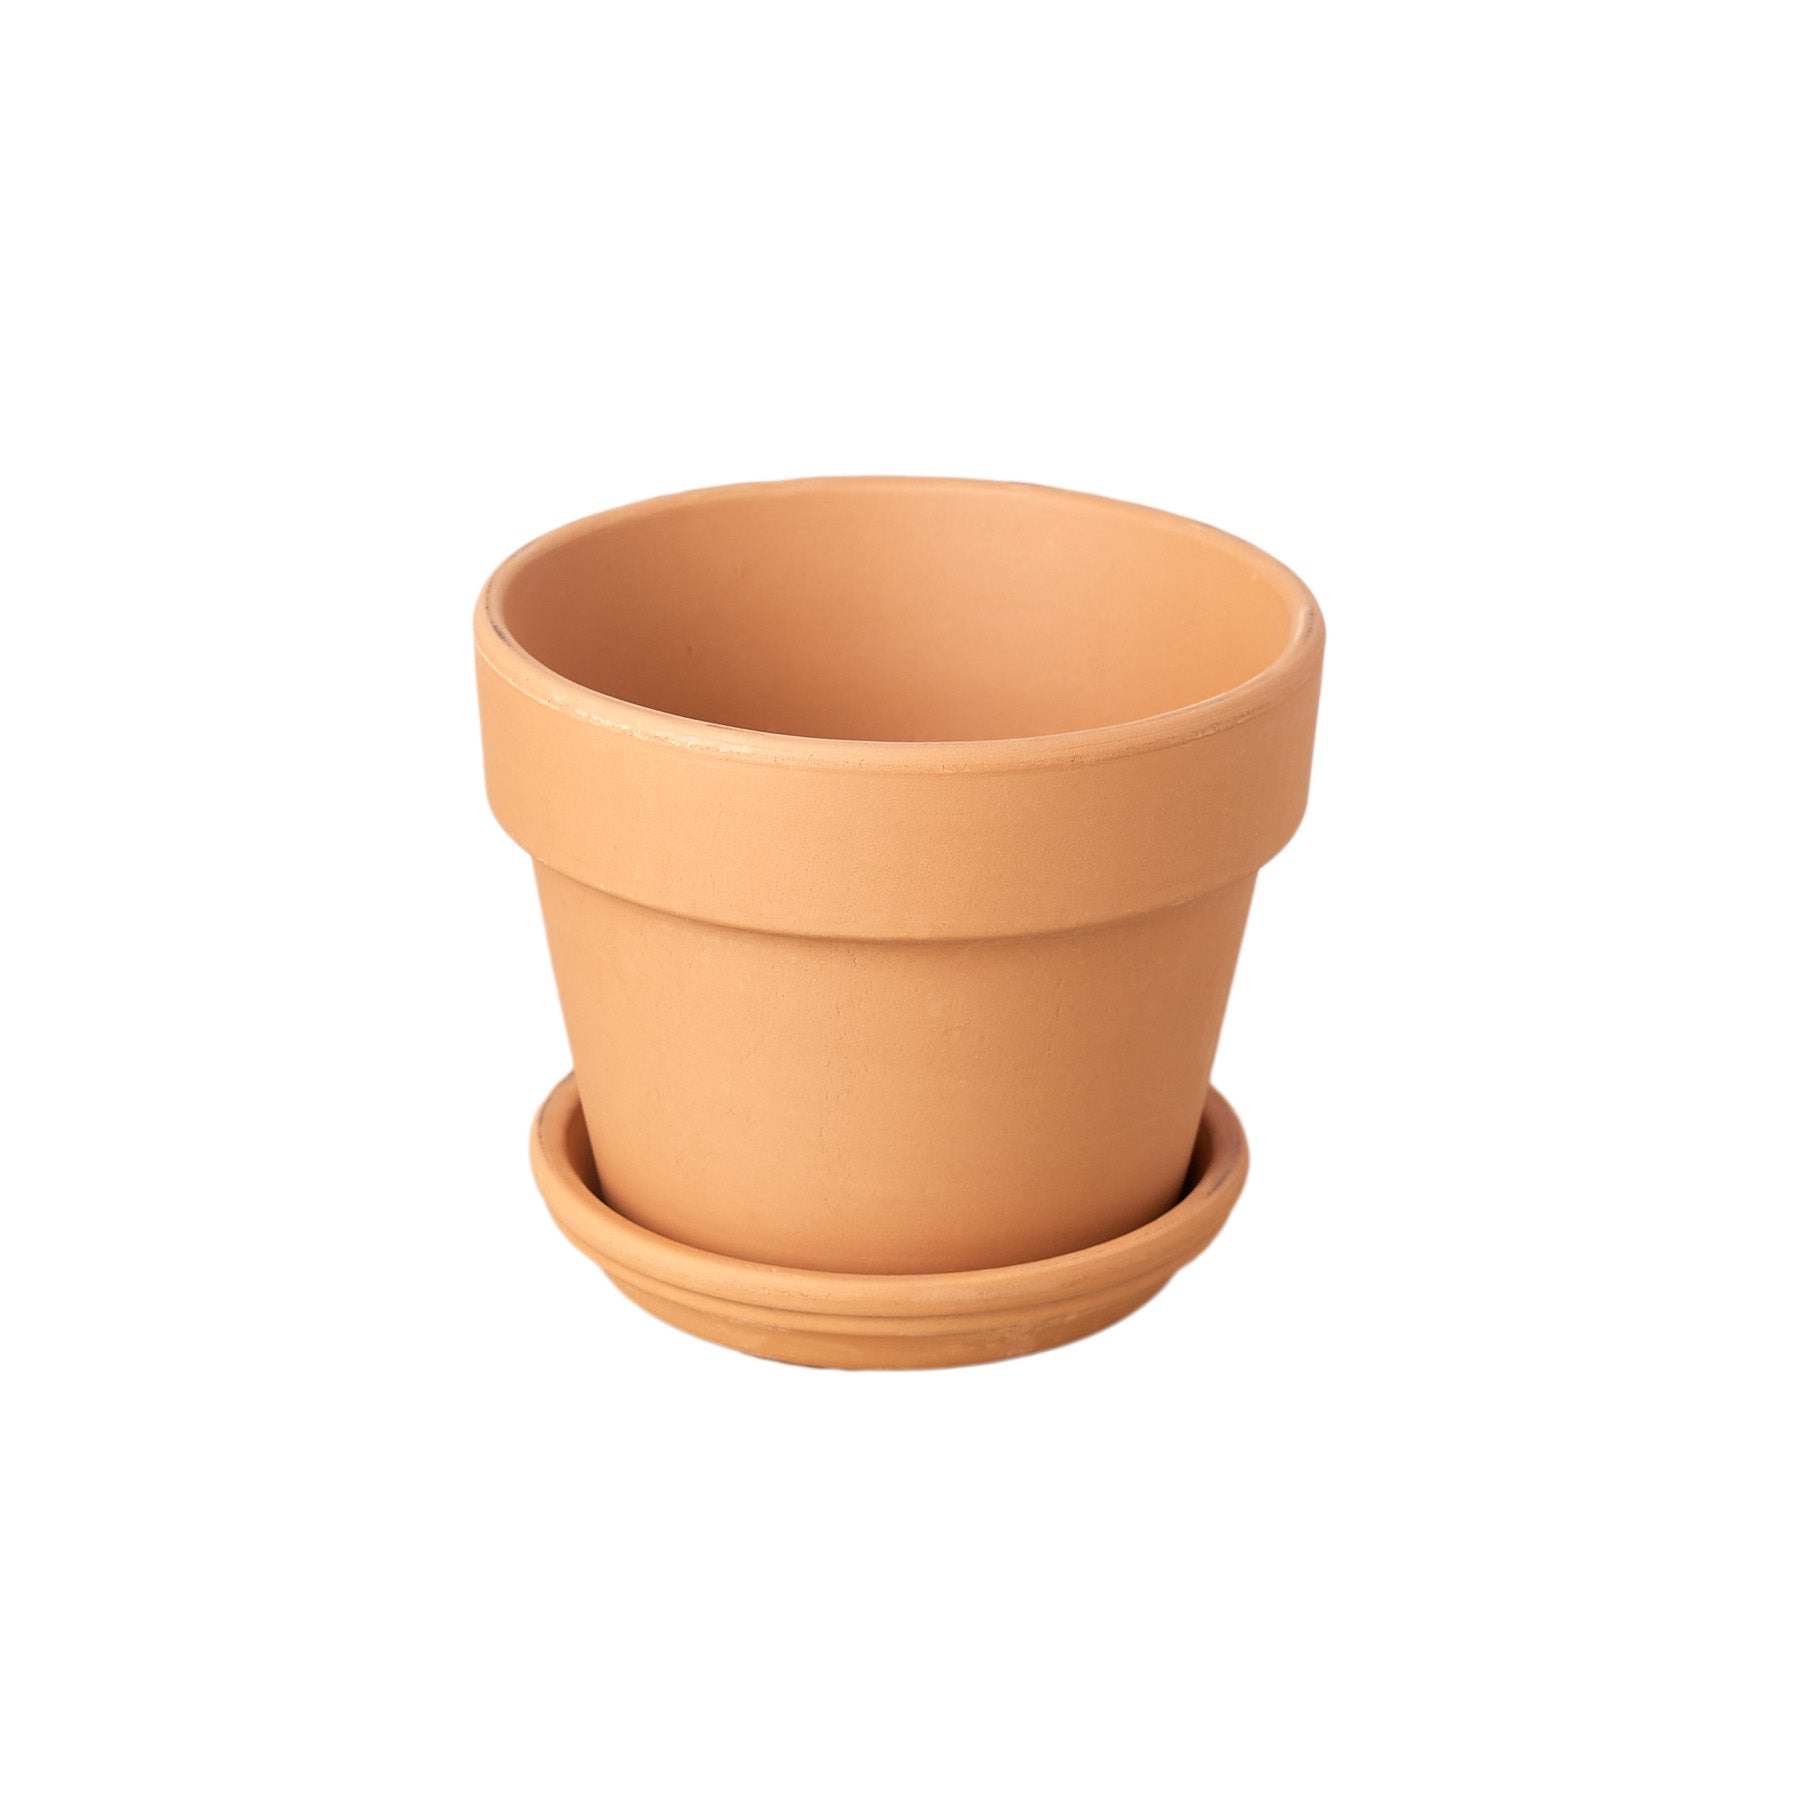 A small clay pot on a white background, perfect for your garden or plant nursery needs.